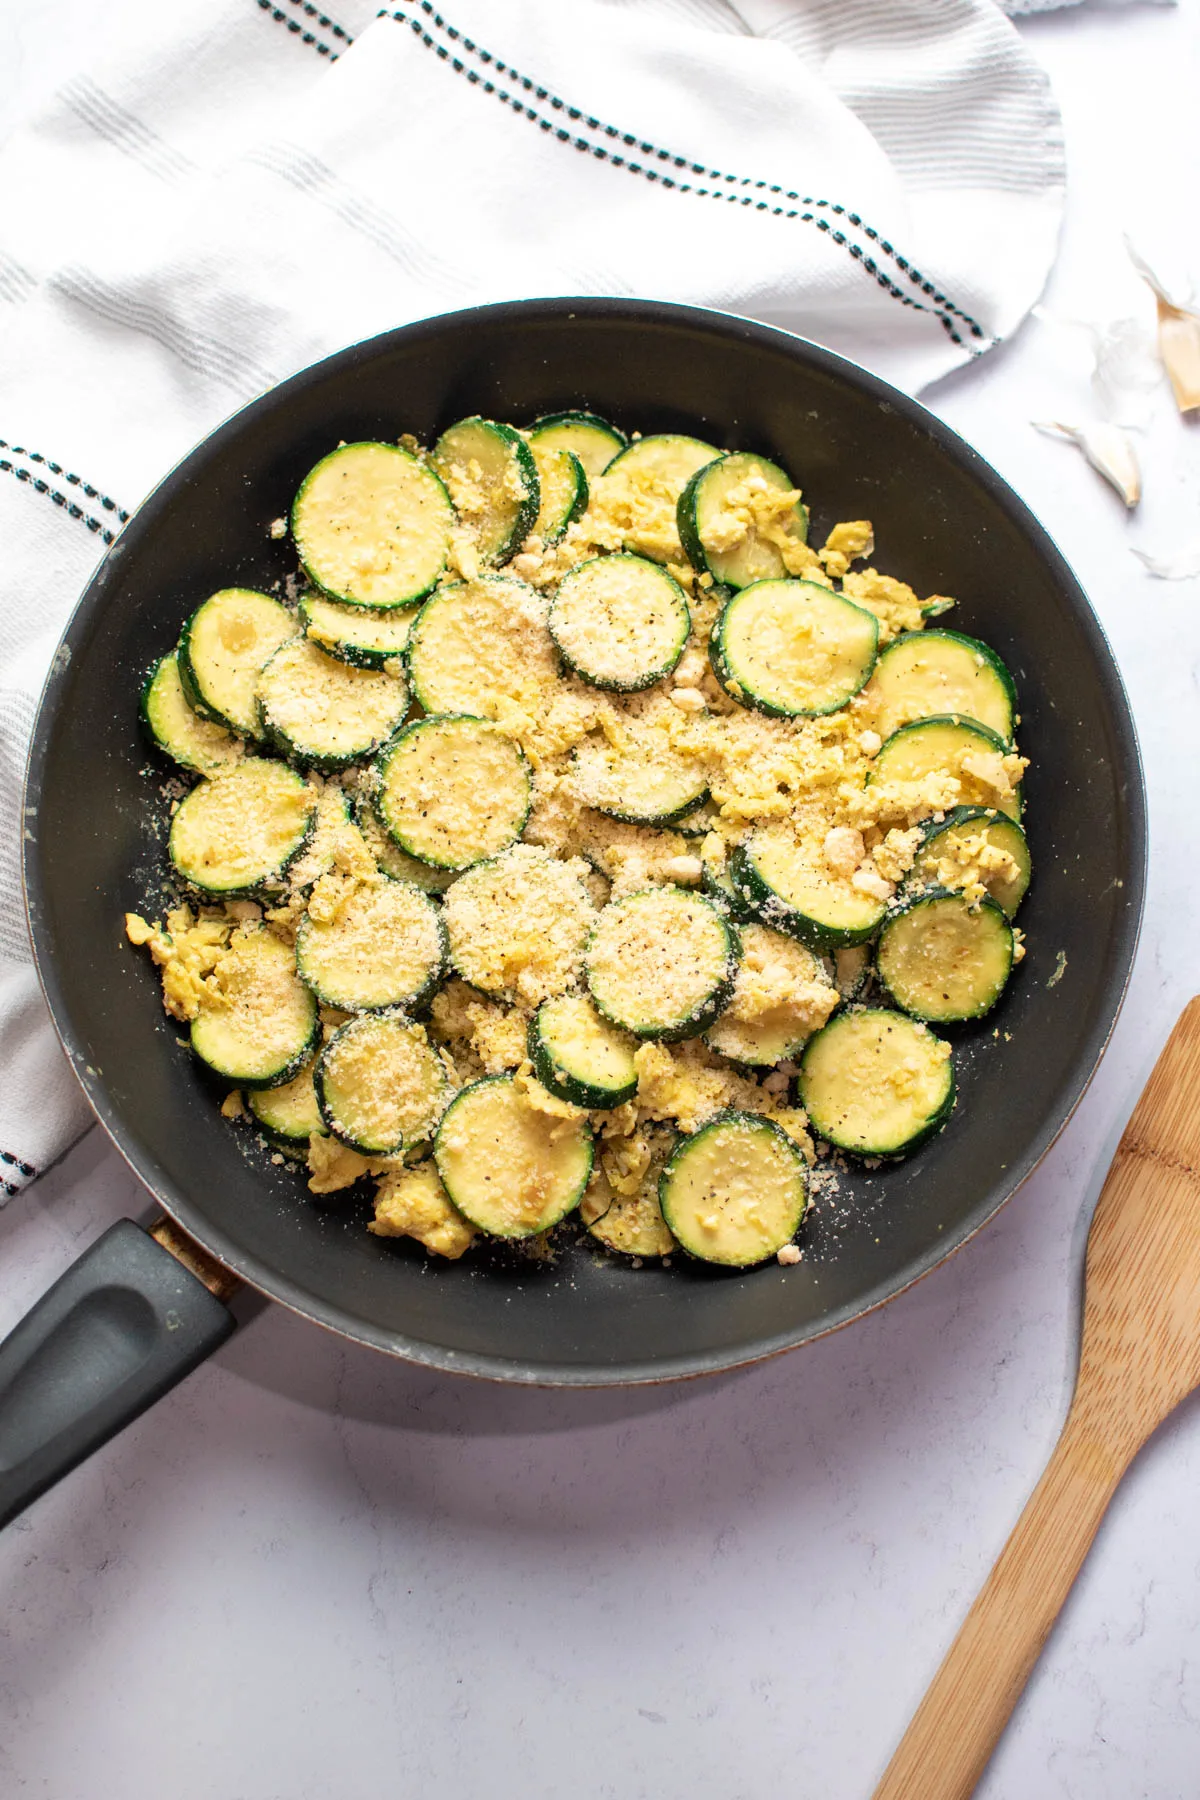 Cooked eggs and zucchini with parmesan cheese in black frying pan with wood spoon laying nearby.